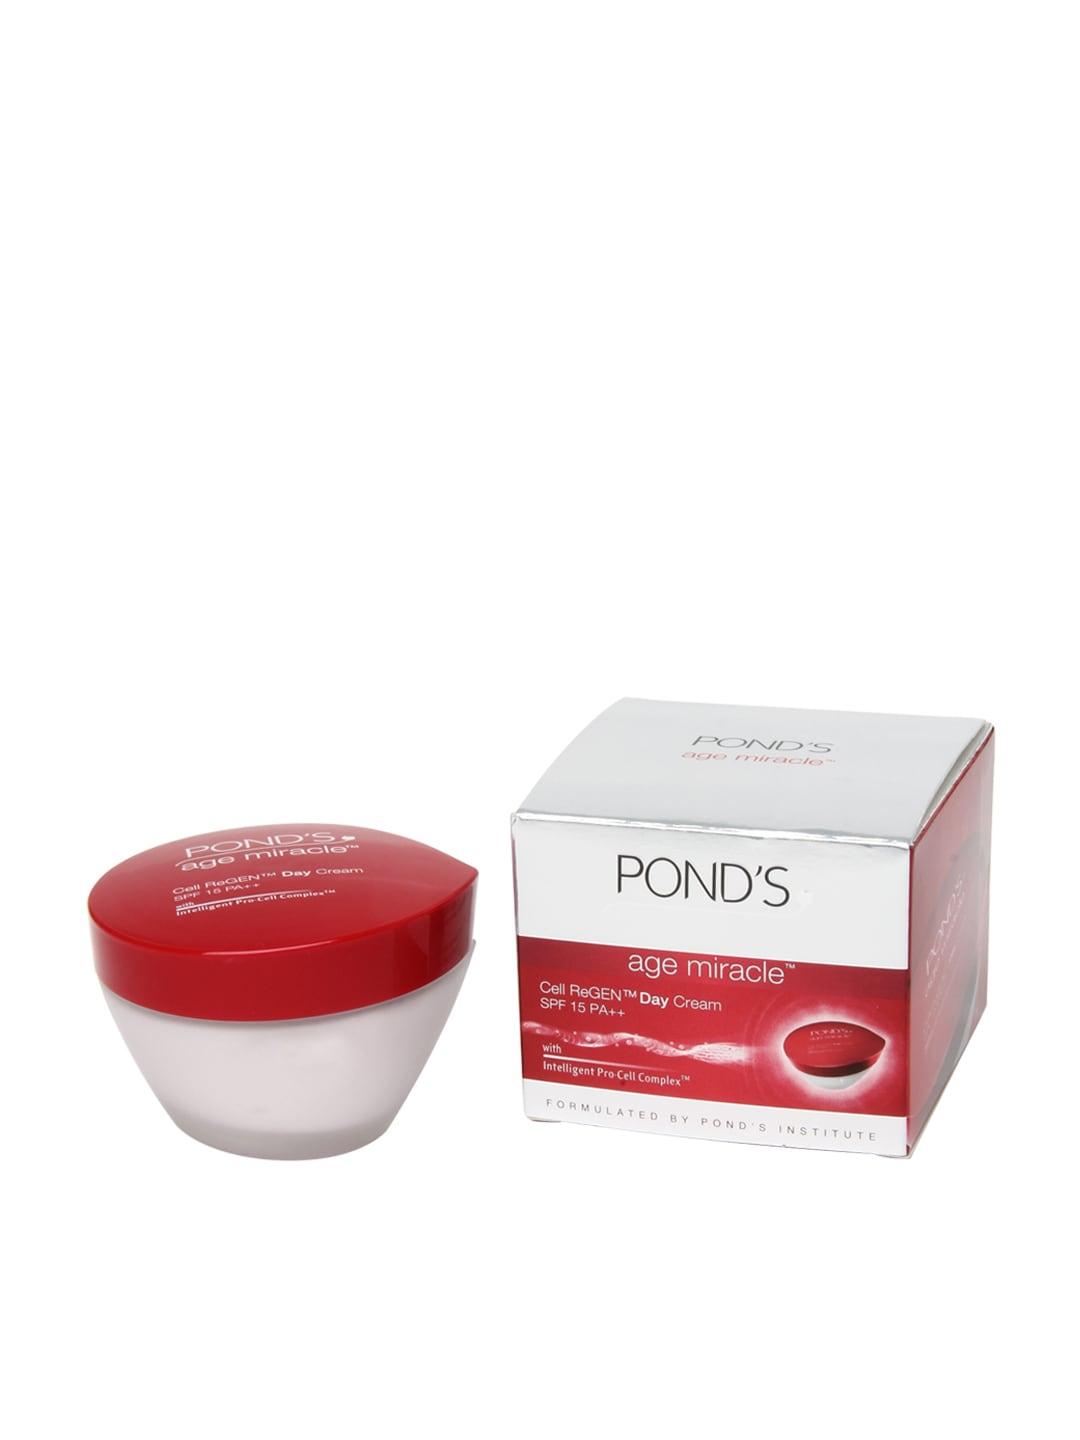 Ponds Age Miracle Cell ReGEN Day Cream 35 g